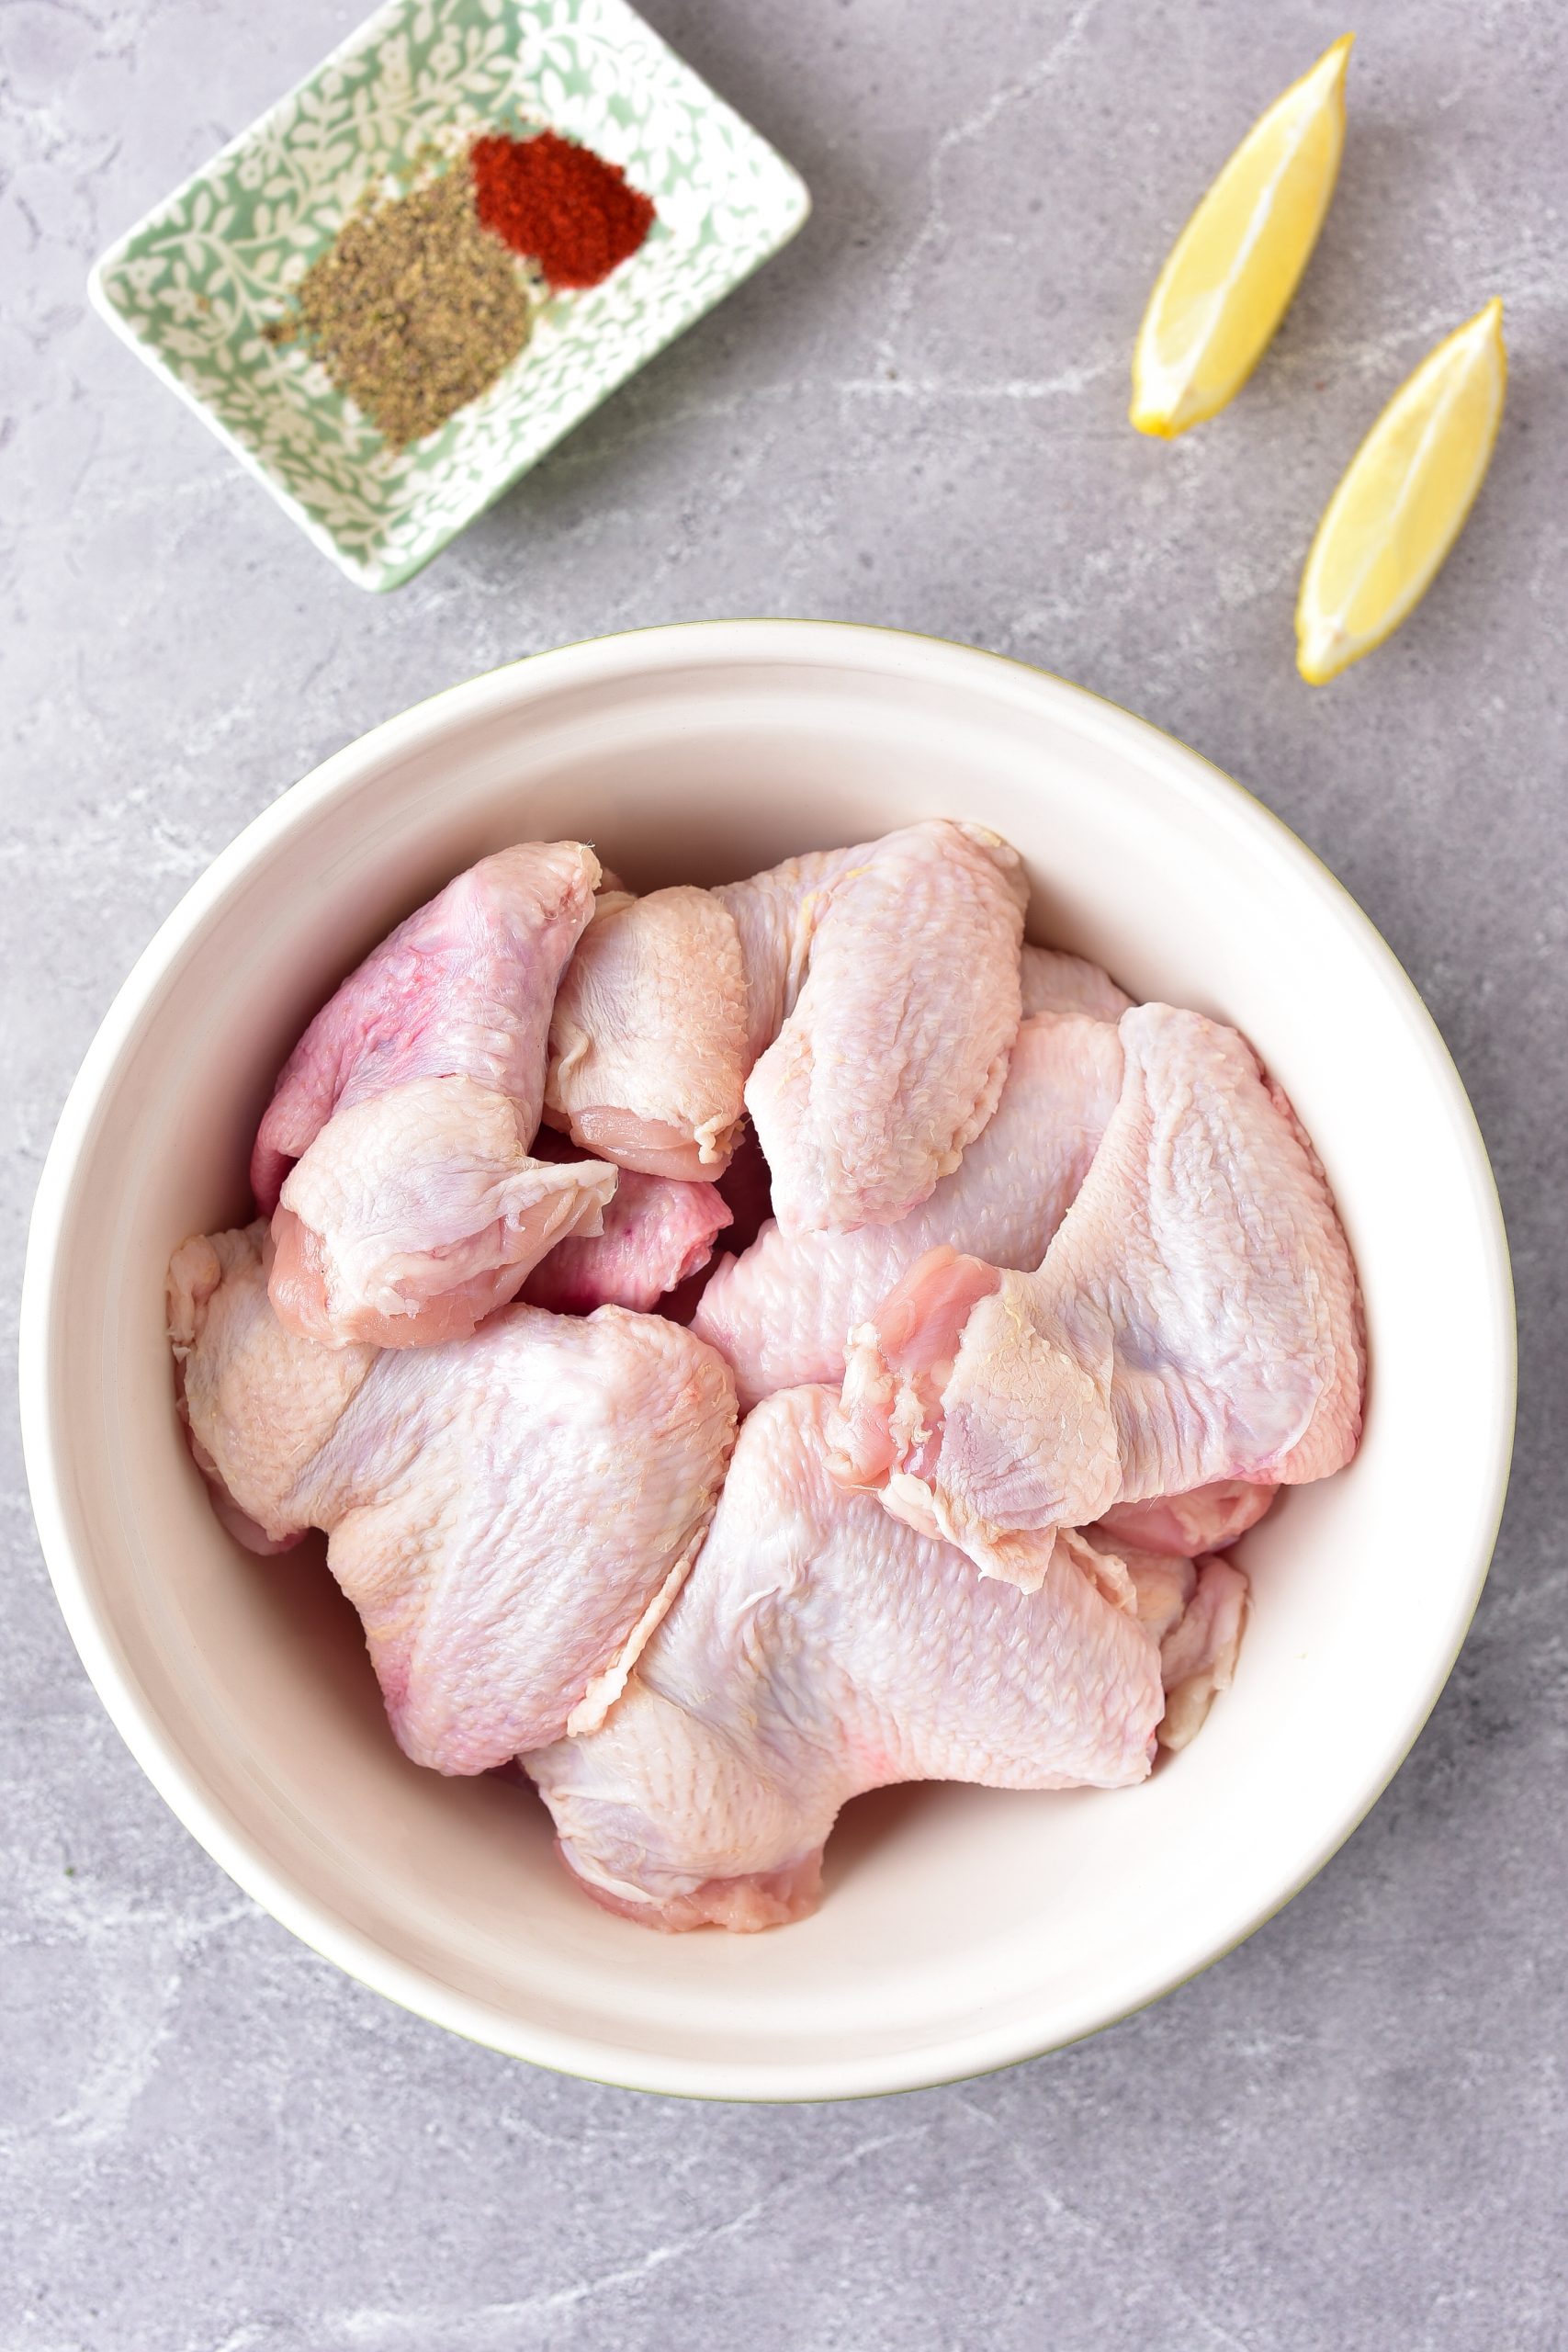 Place the chicken wings in a large mixing bowl.